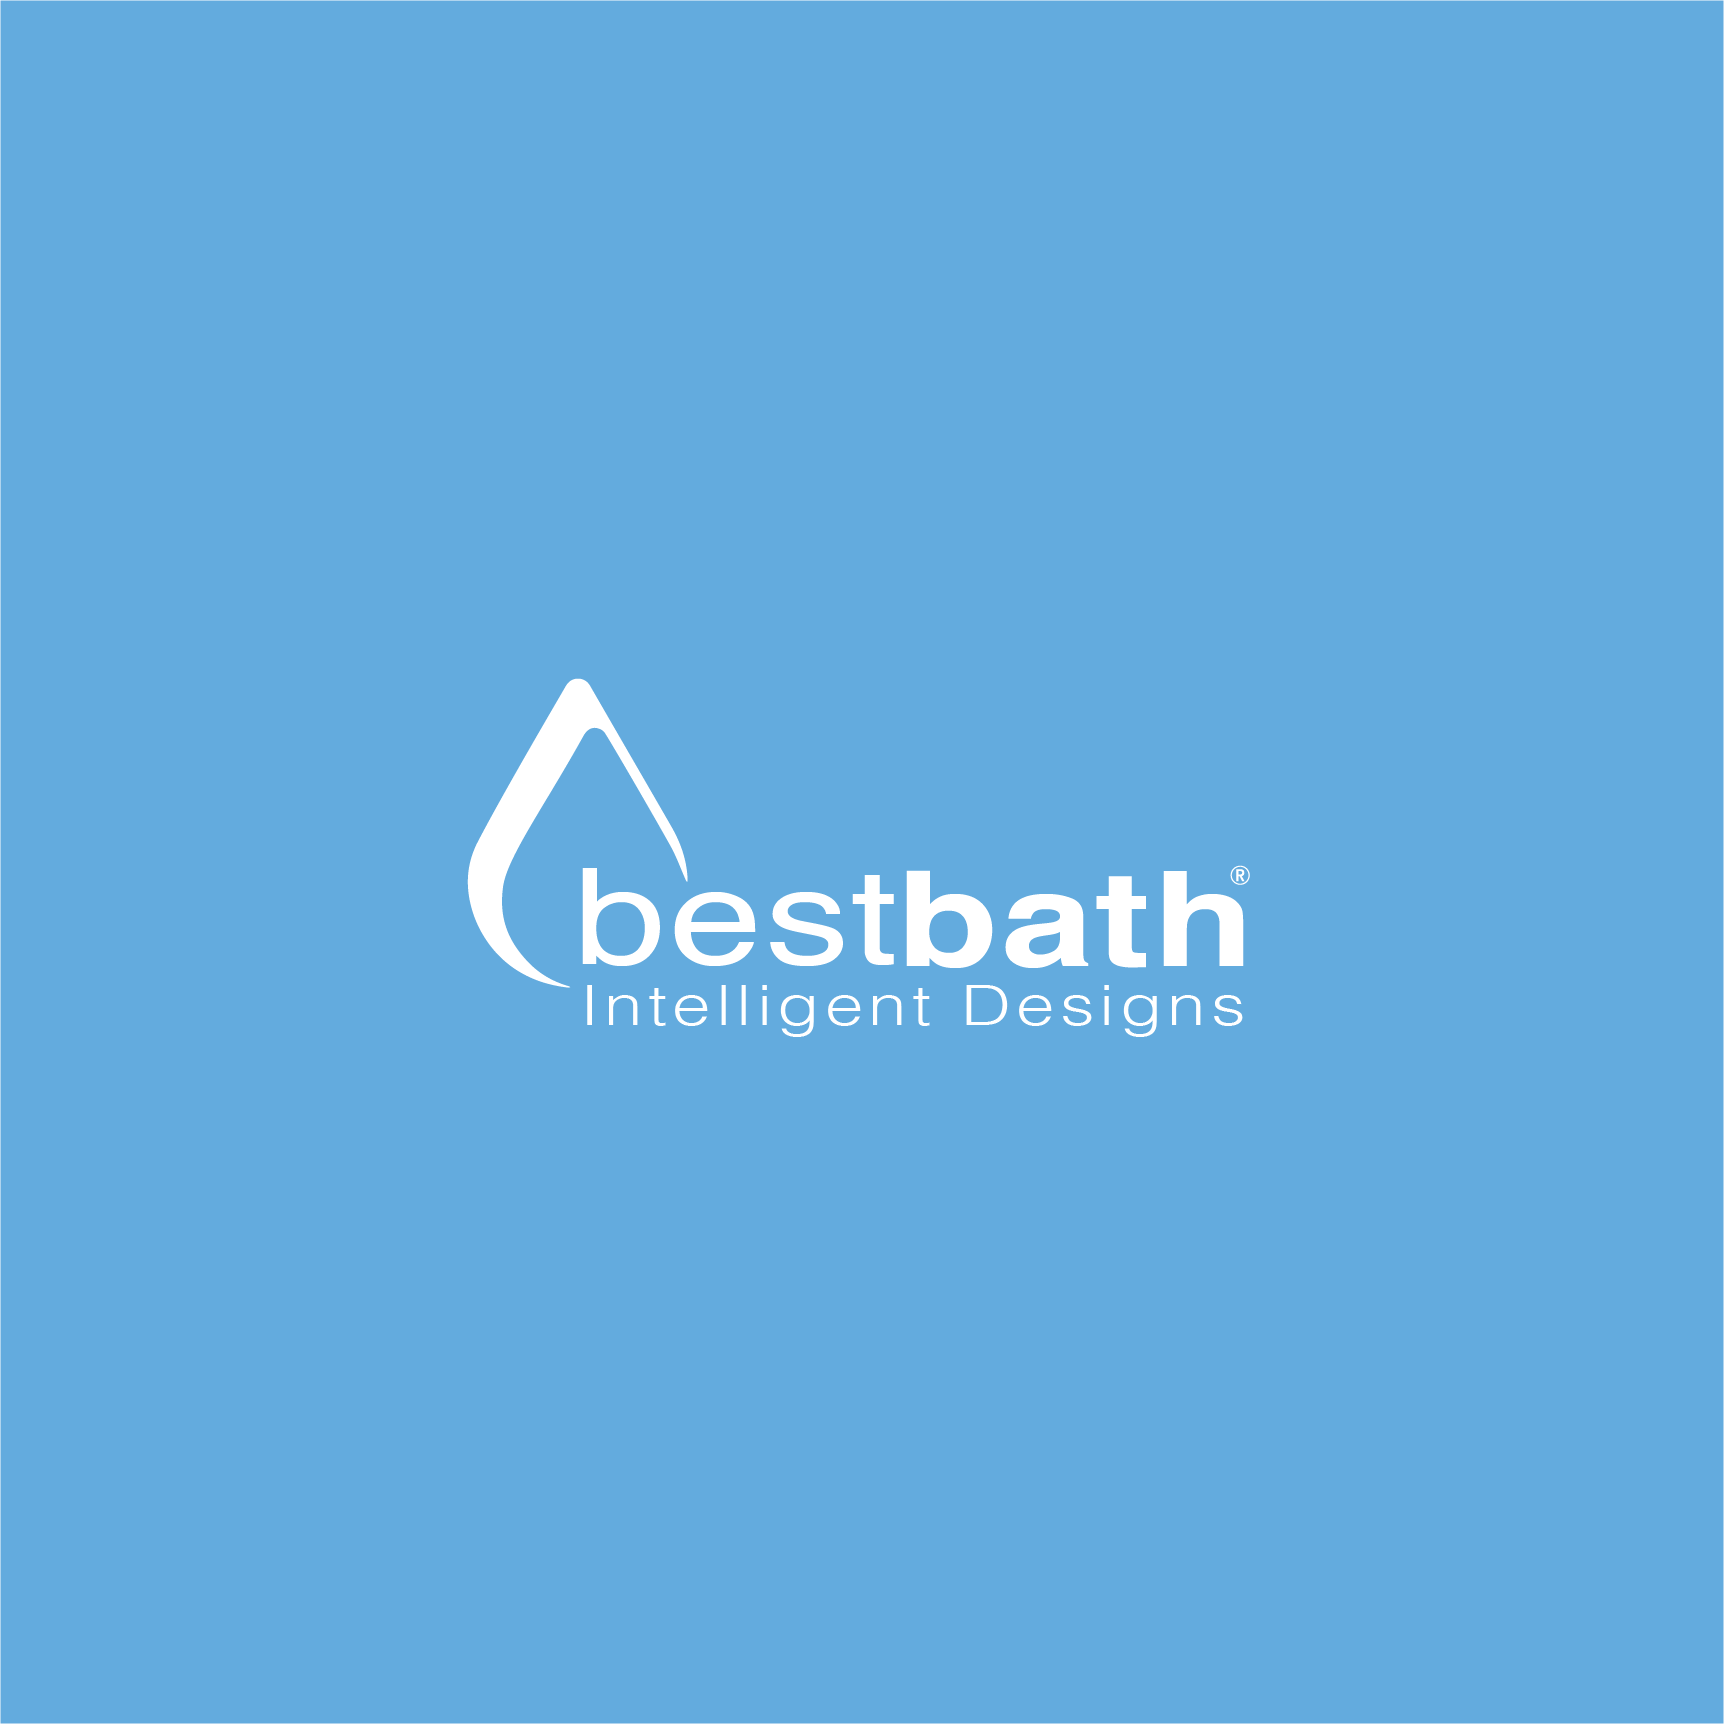 Study Confirms Installation of Bestbath One-Piece Shower Costs 82% Less Than Ceramic and 30% Less Than Conventional Mud Set Surrounds